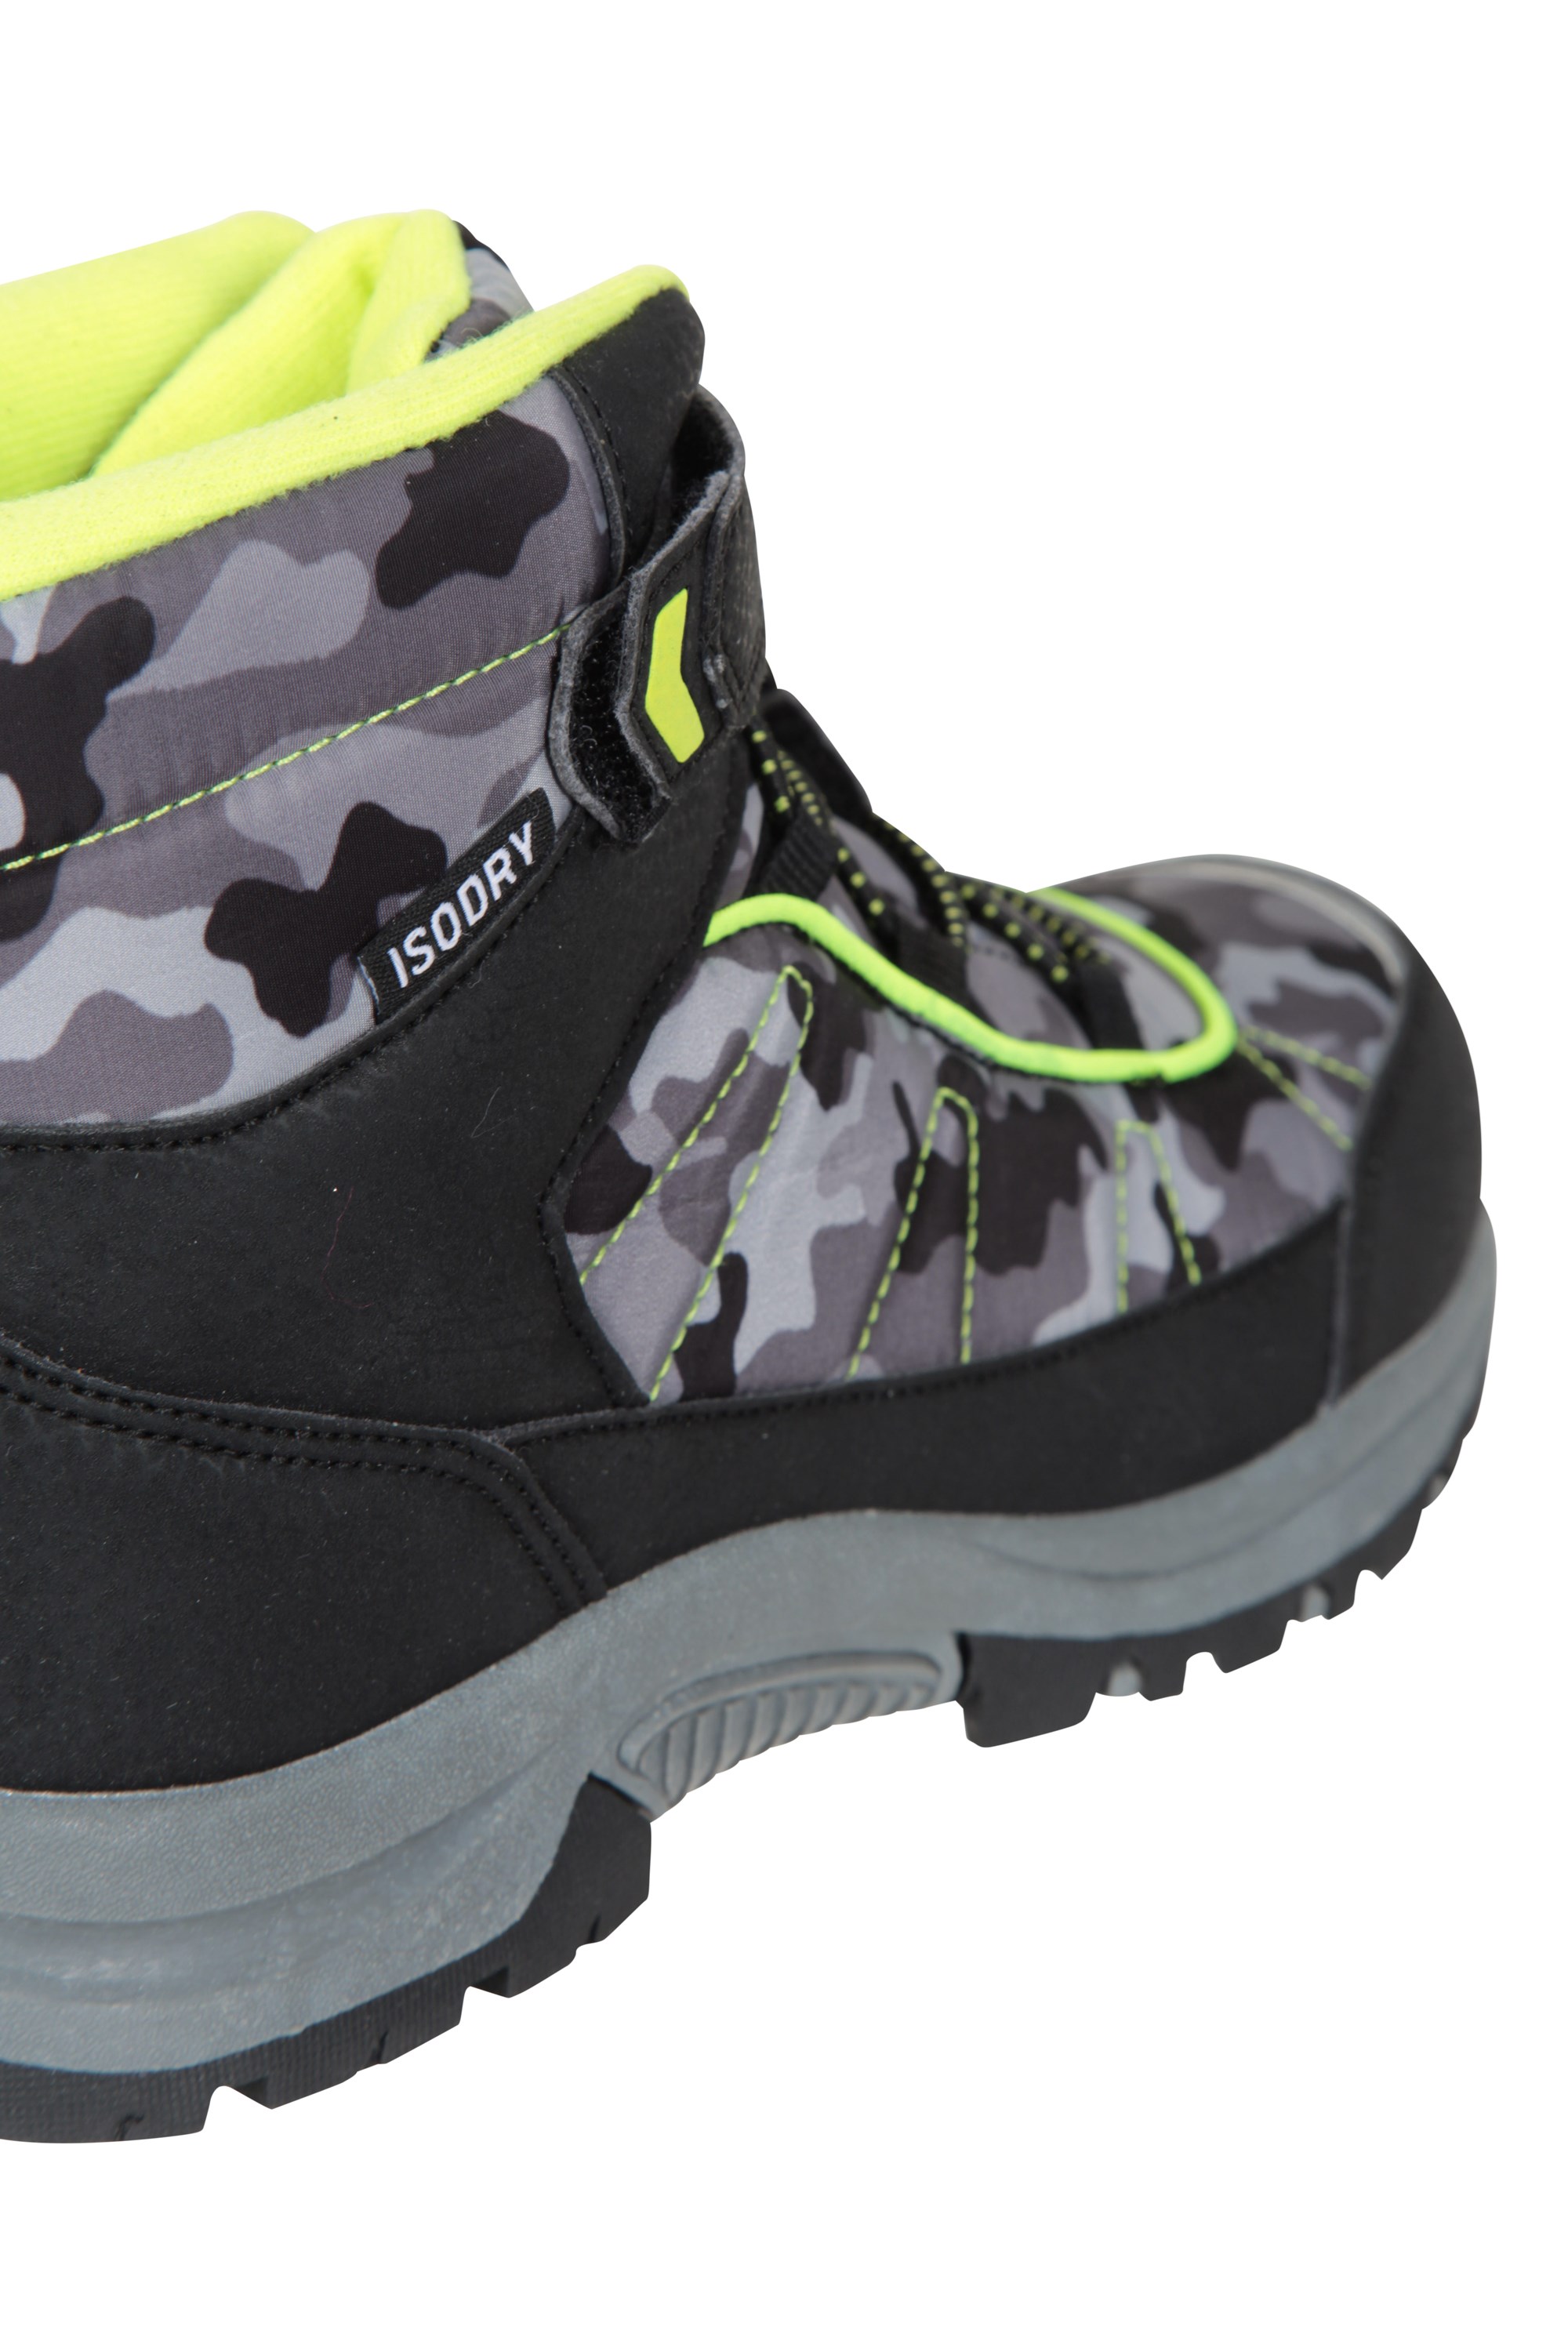 mountain warehouse childrens boots